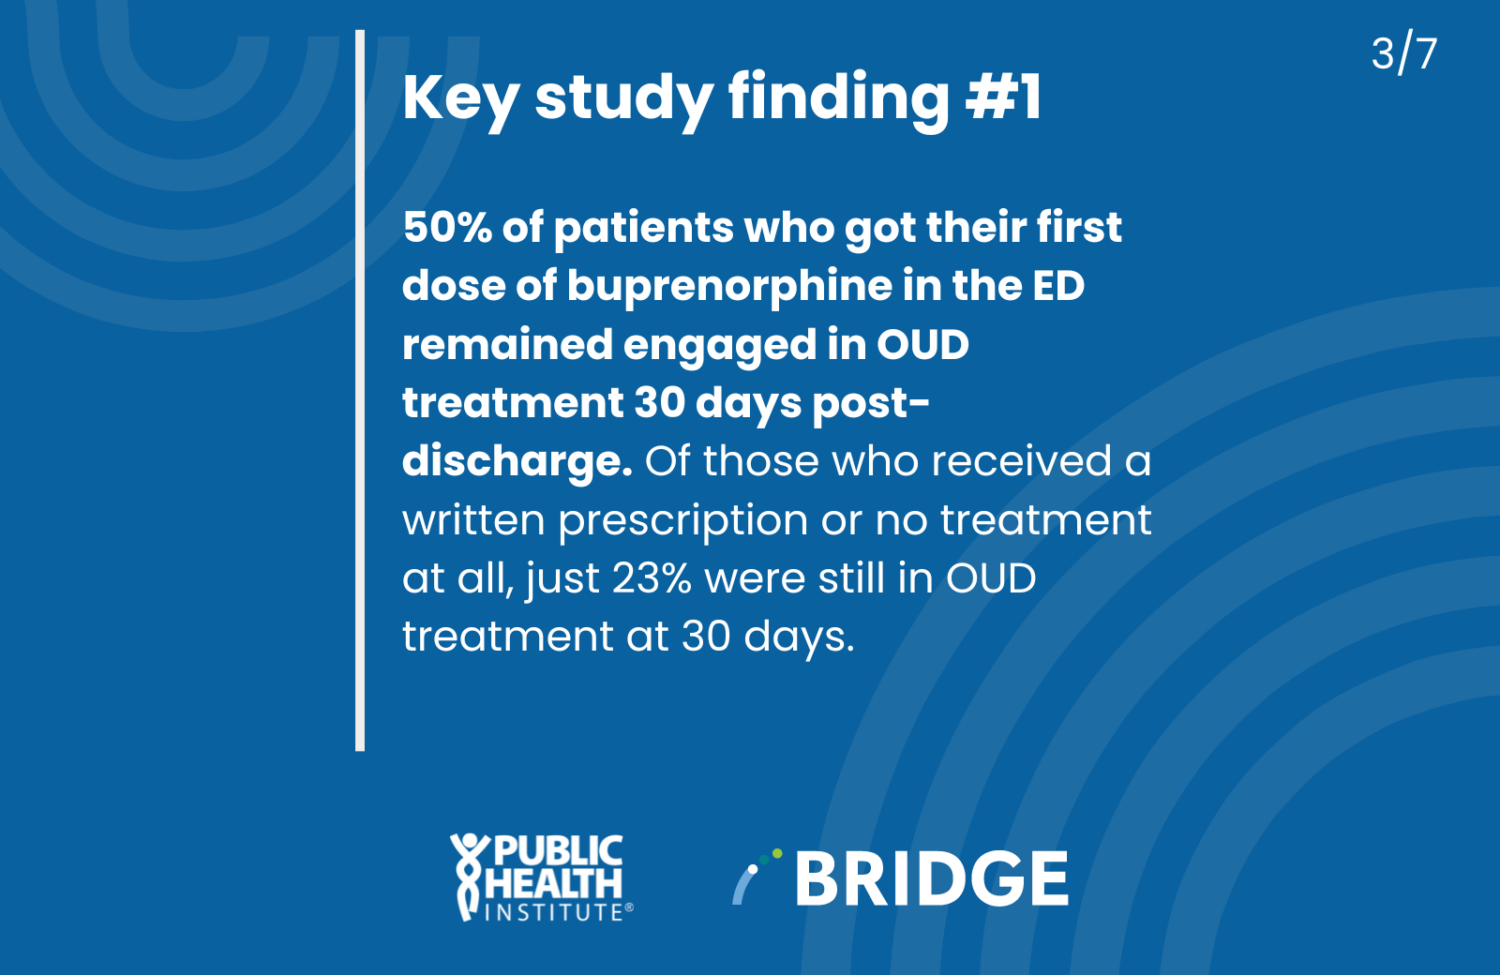 Key study finding #1– 50% of patients who got their first dose of buprenorphine in the ED remained engaged in OUD treatment 30 days post-discharge. Of those who received a written prescription or no treatment at all, just 23% were still in OUD treatment at 30 days.